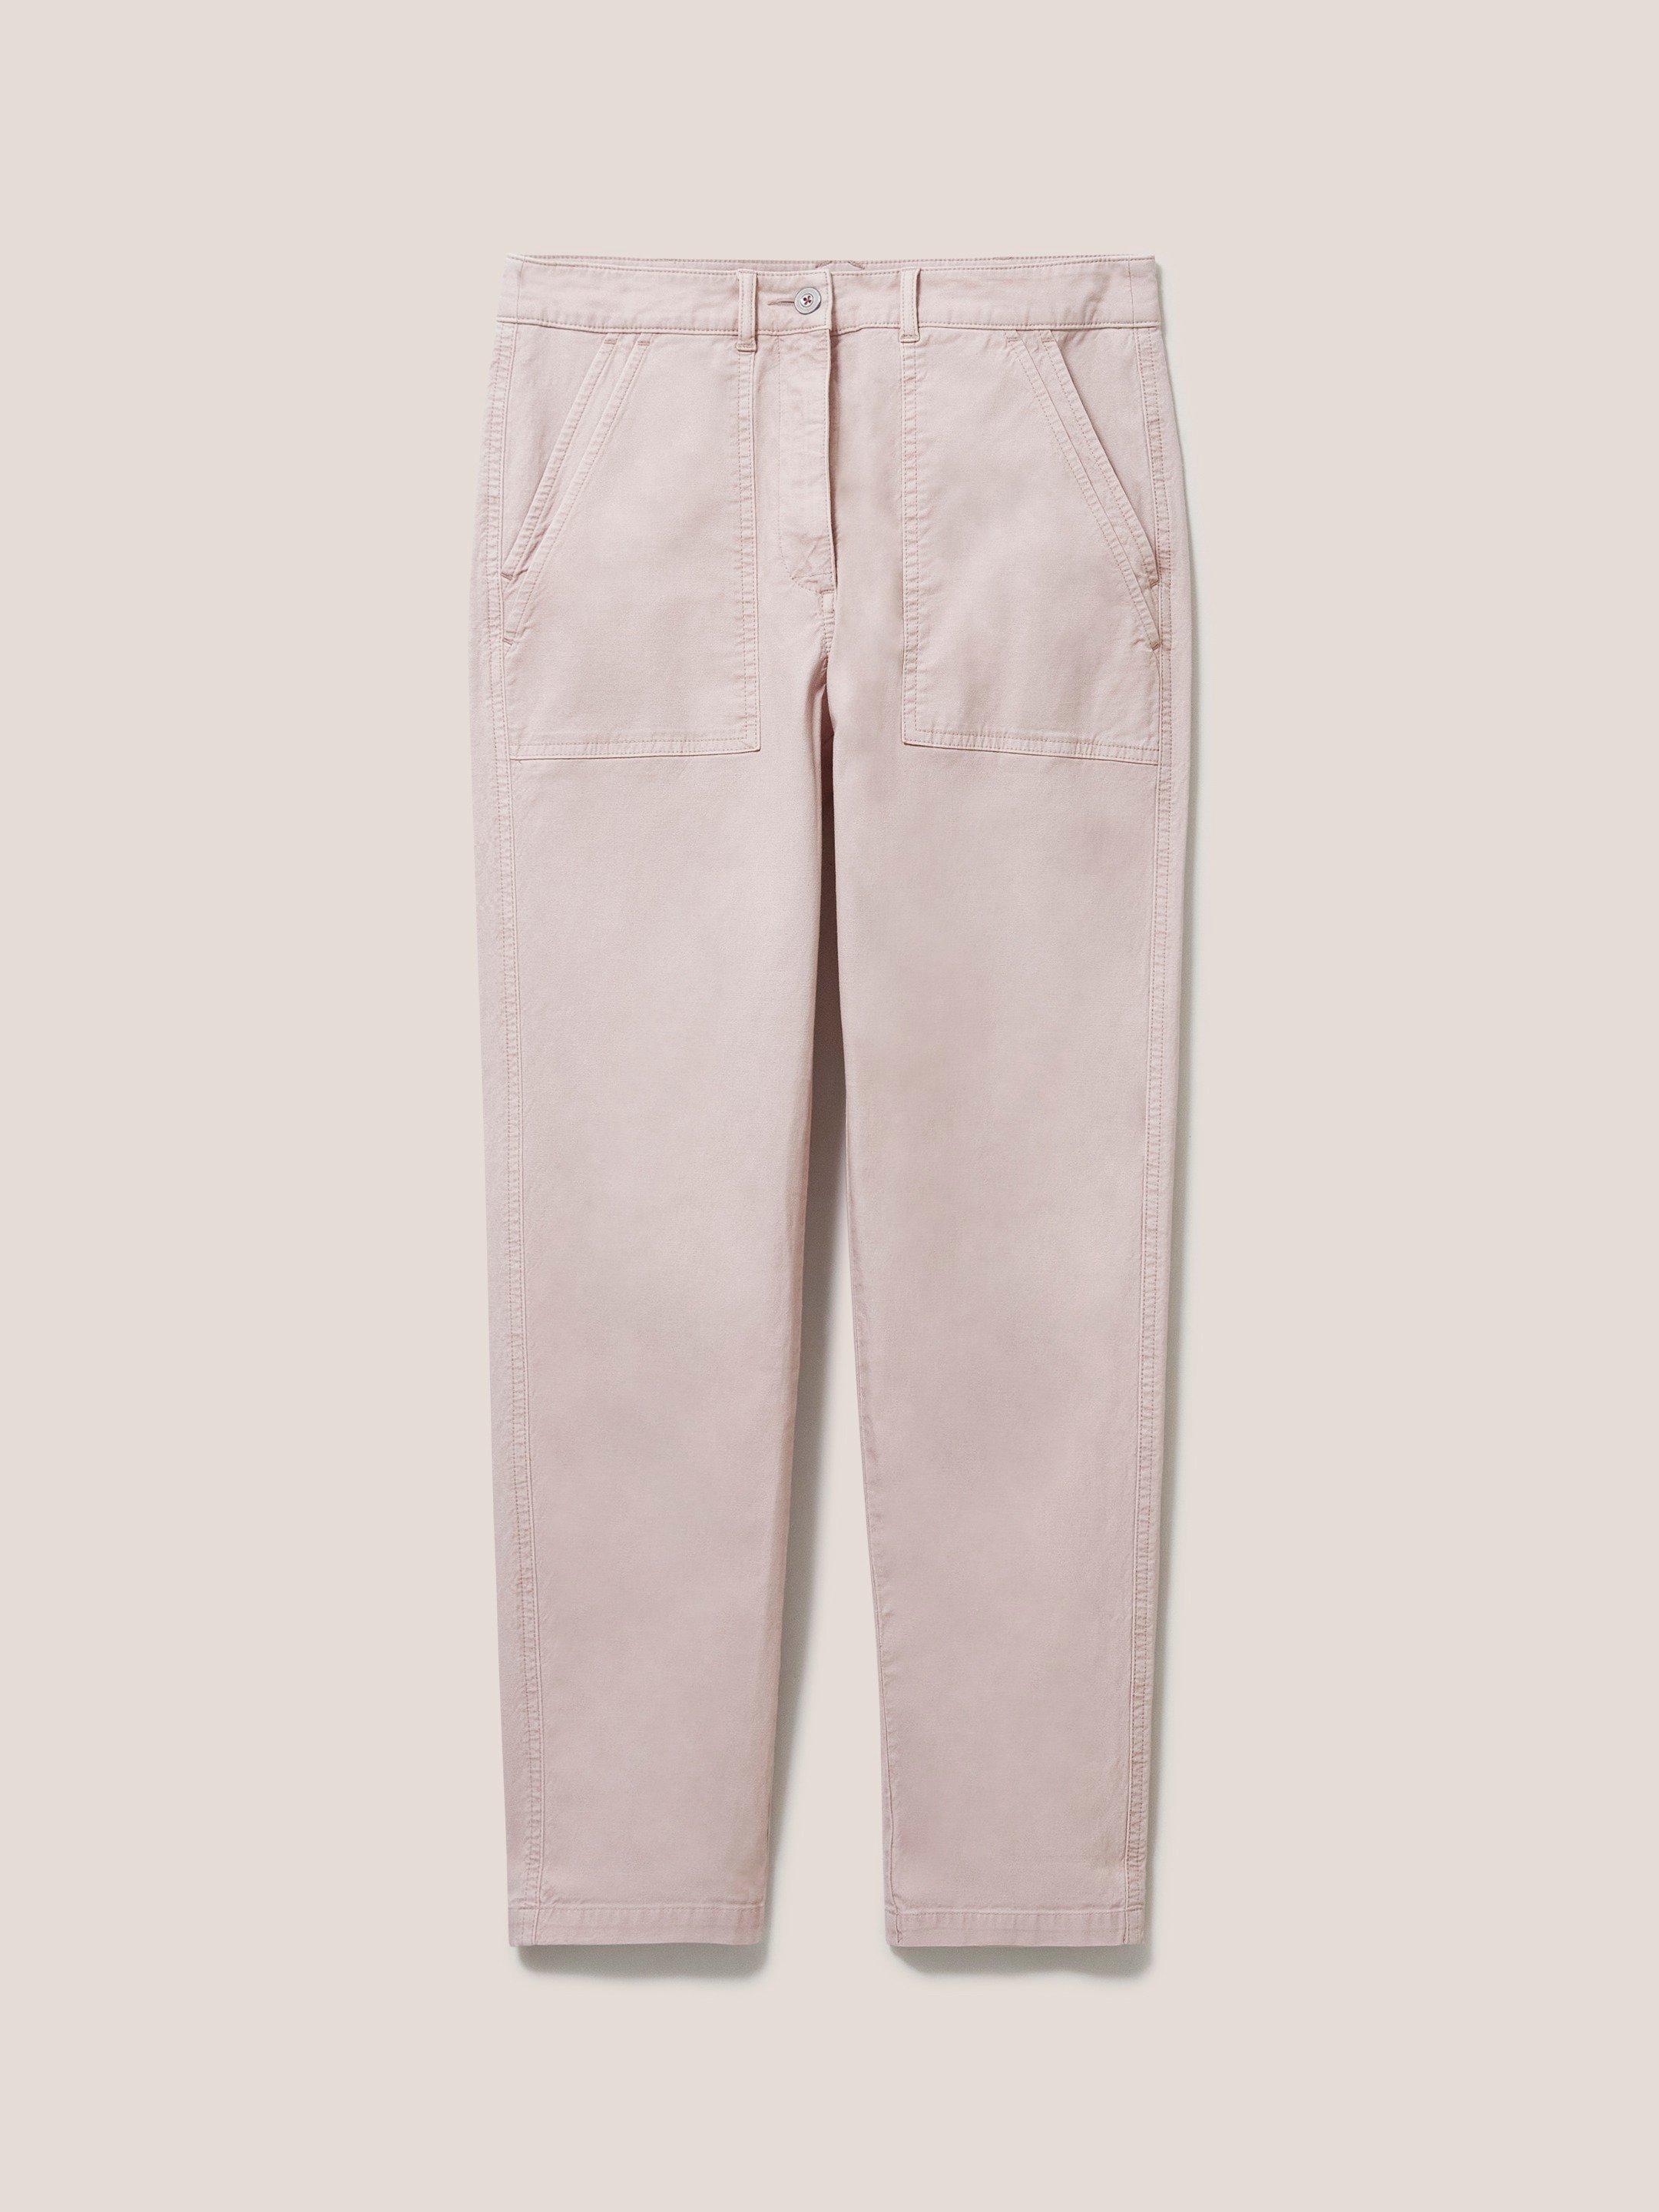 Twister Tea Dye Chino in DUS PINK - FLAT FRONT